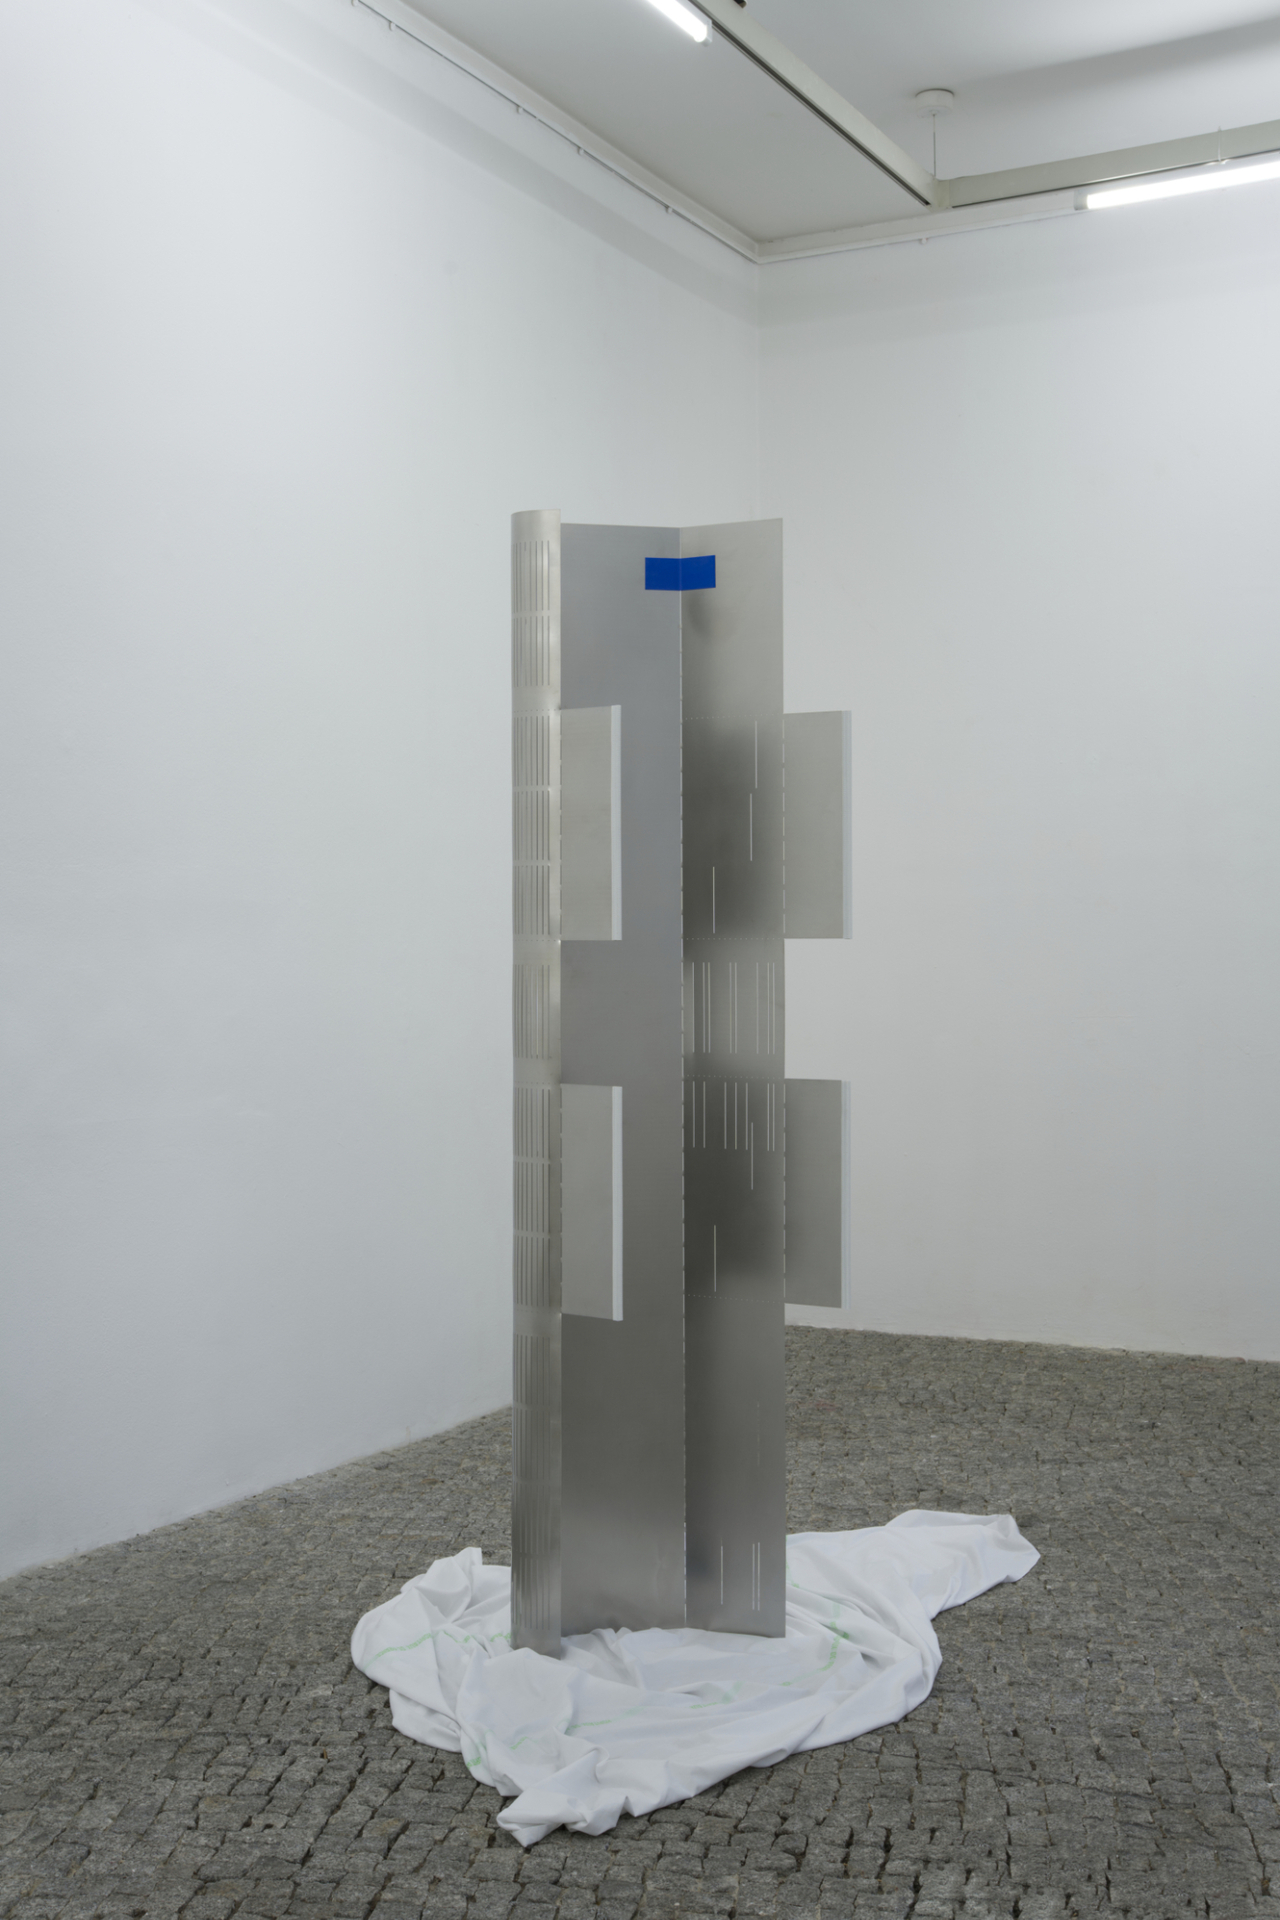 Marina Stanimirovic, ARCHITECTURE DU SILENCE LH01, 2021, 204 x 50 x 16 cm, 1mm stainless steel, silicone rubber